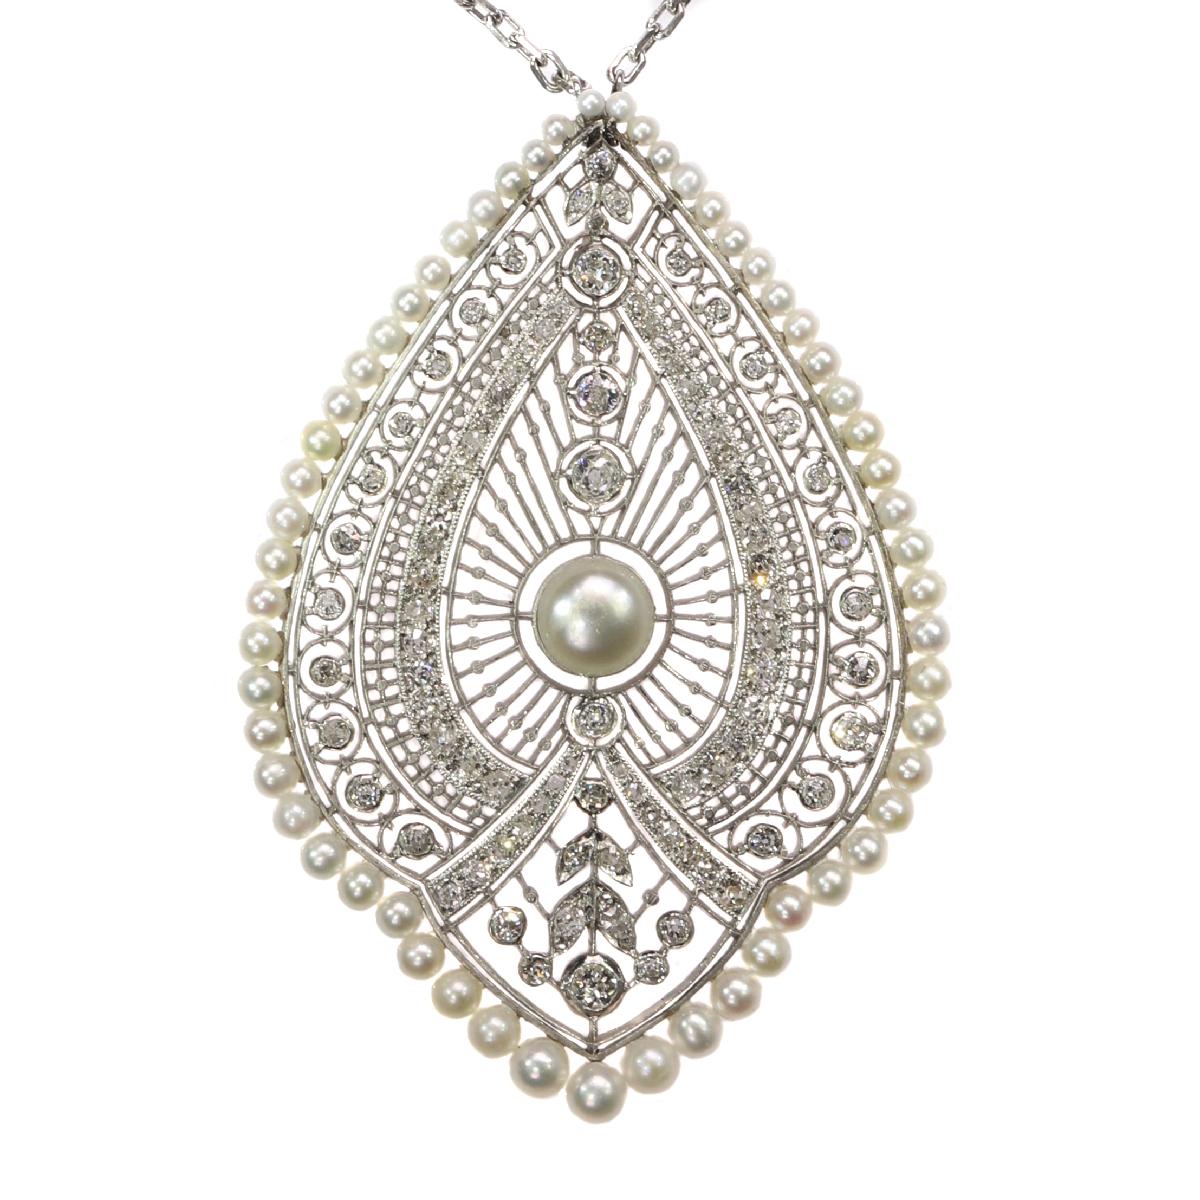 Everyone's astonishment at this princess necklace with a platinum peacock plume pendant out of typical Edwardian hand-sawn lace is indescribable. Its intricate craftsmanship radiates from the central natural orient pearl over alternating halos of 96